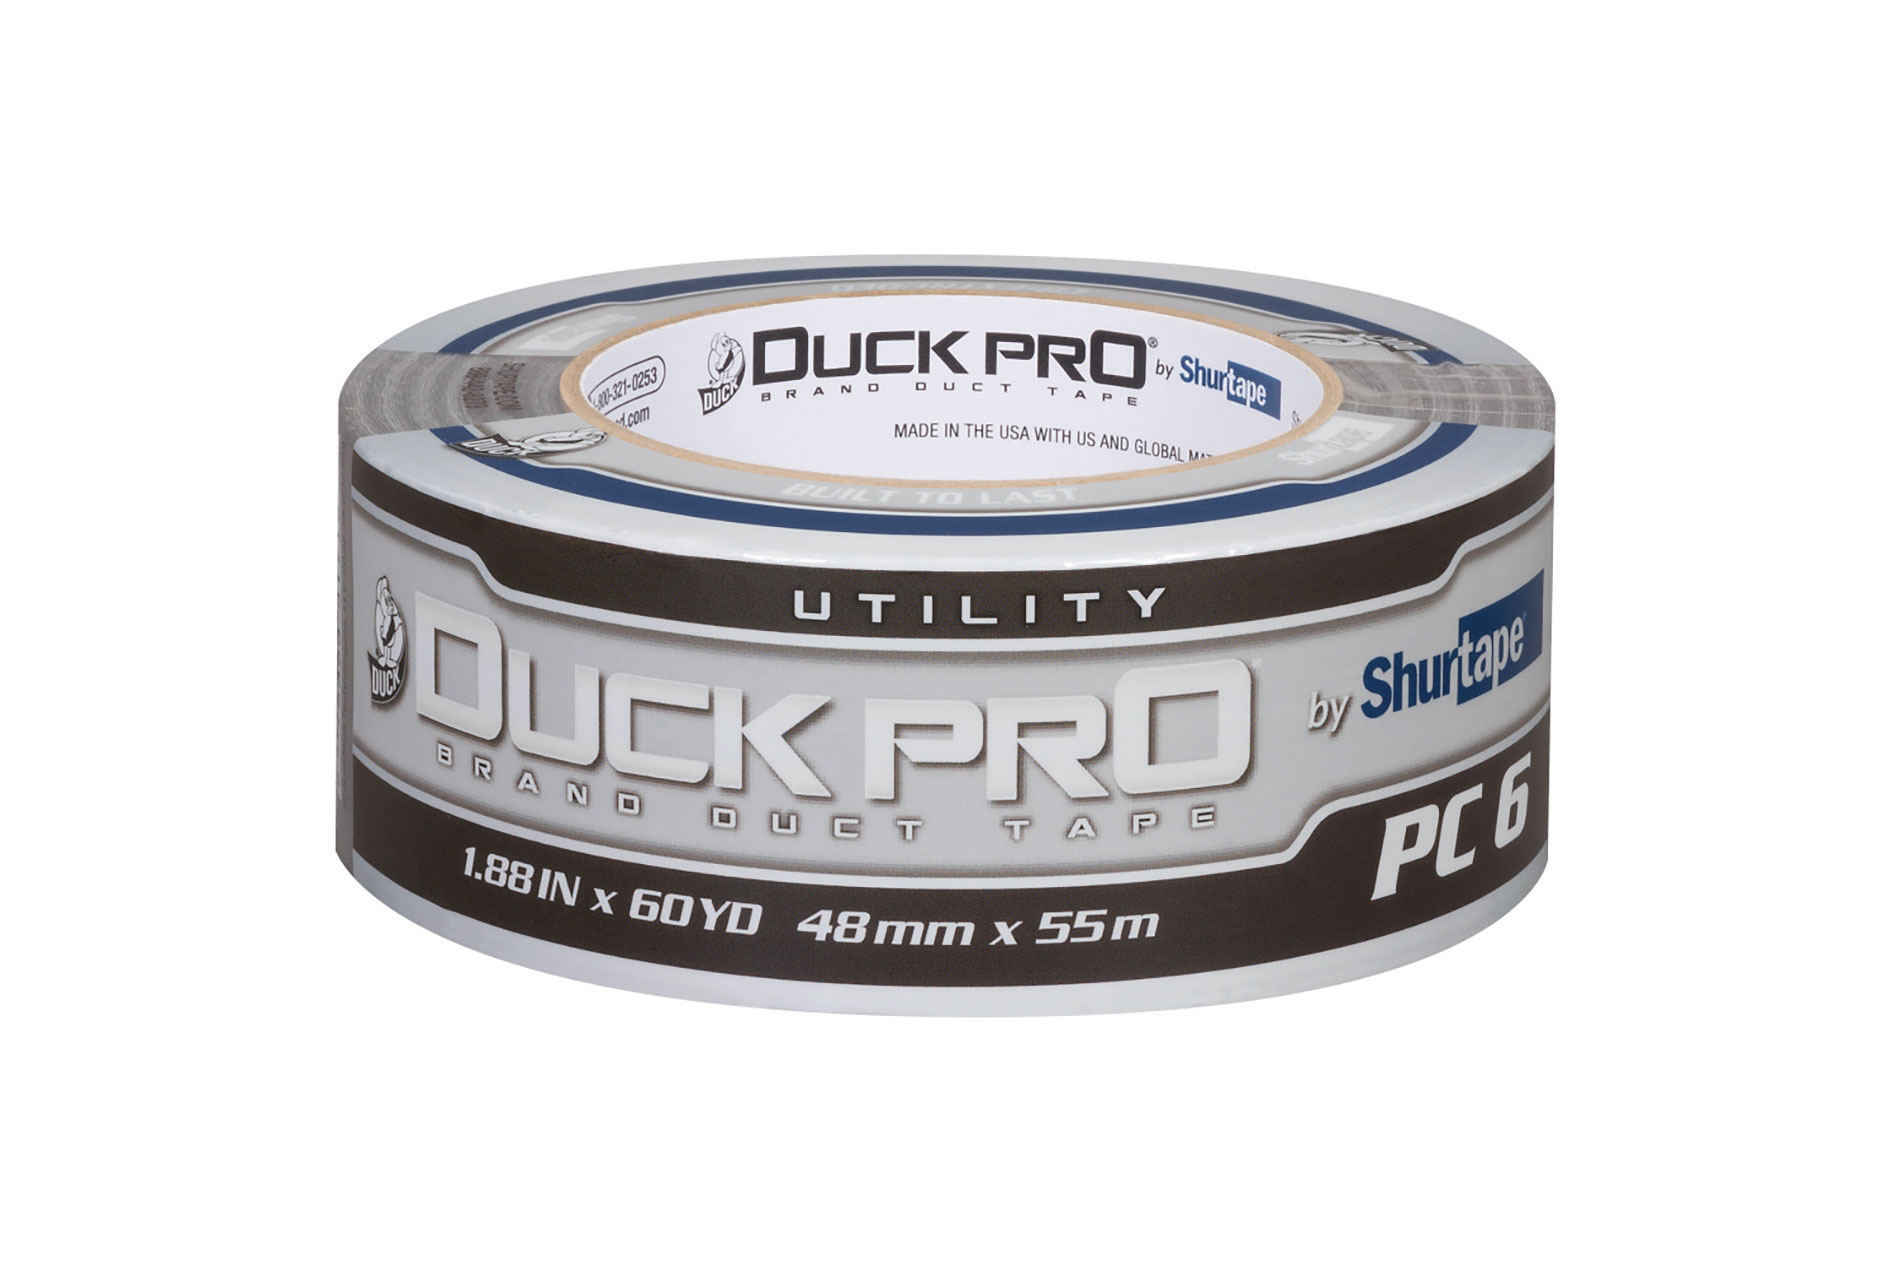 Gray duct tape labeled "Duck Pro." Image by Shurtape.